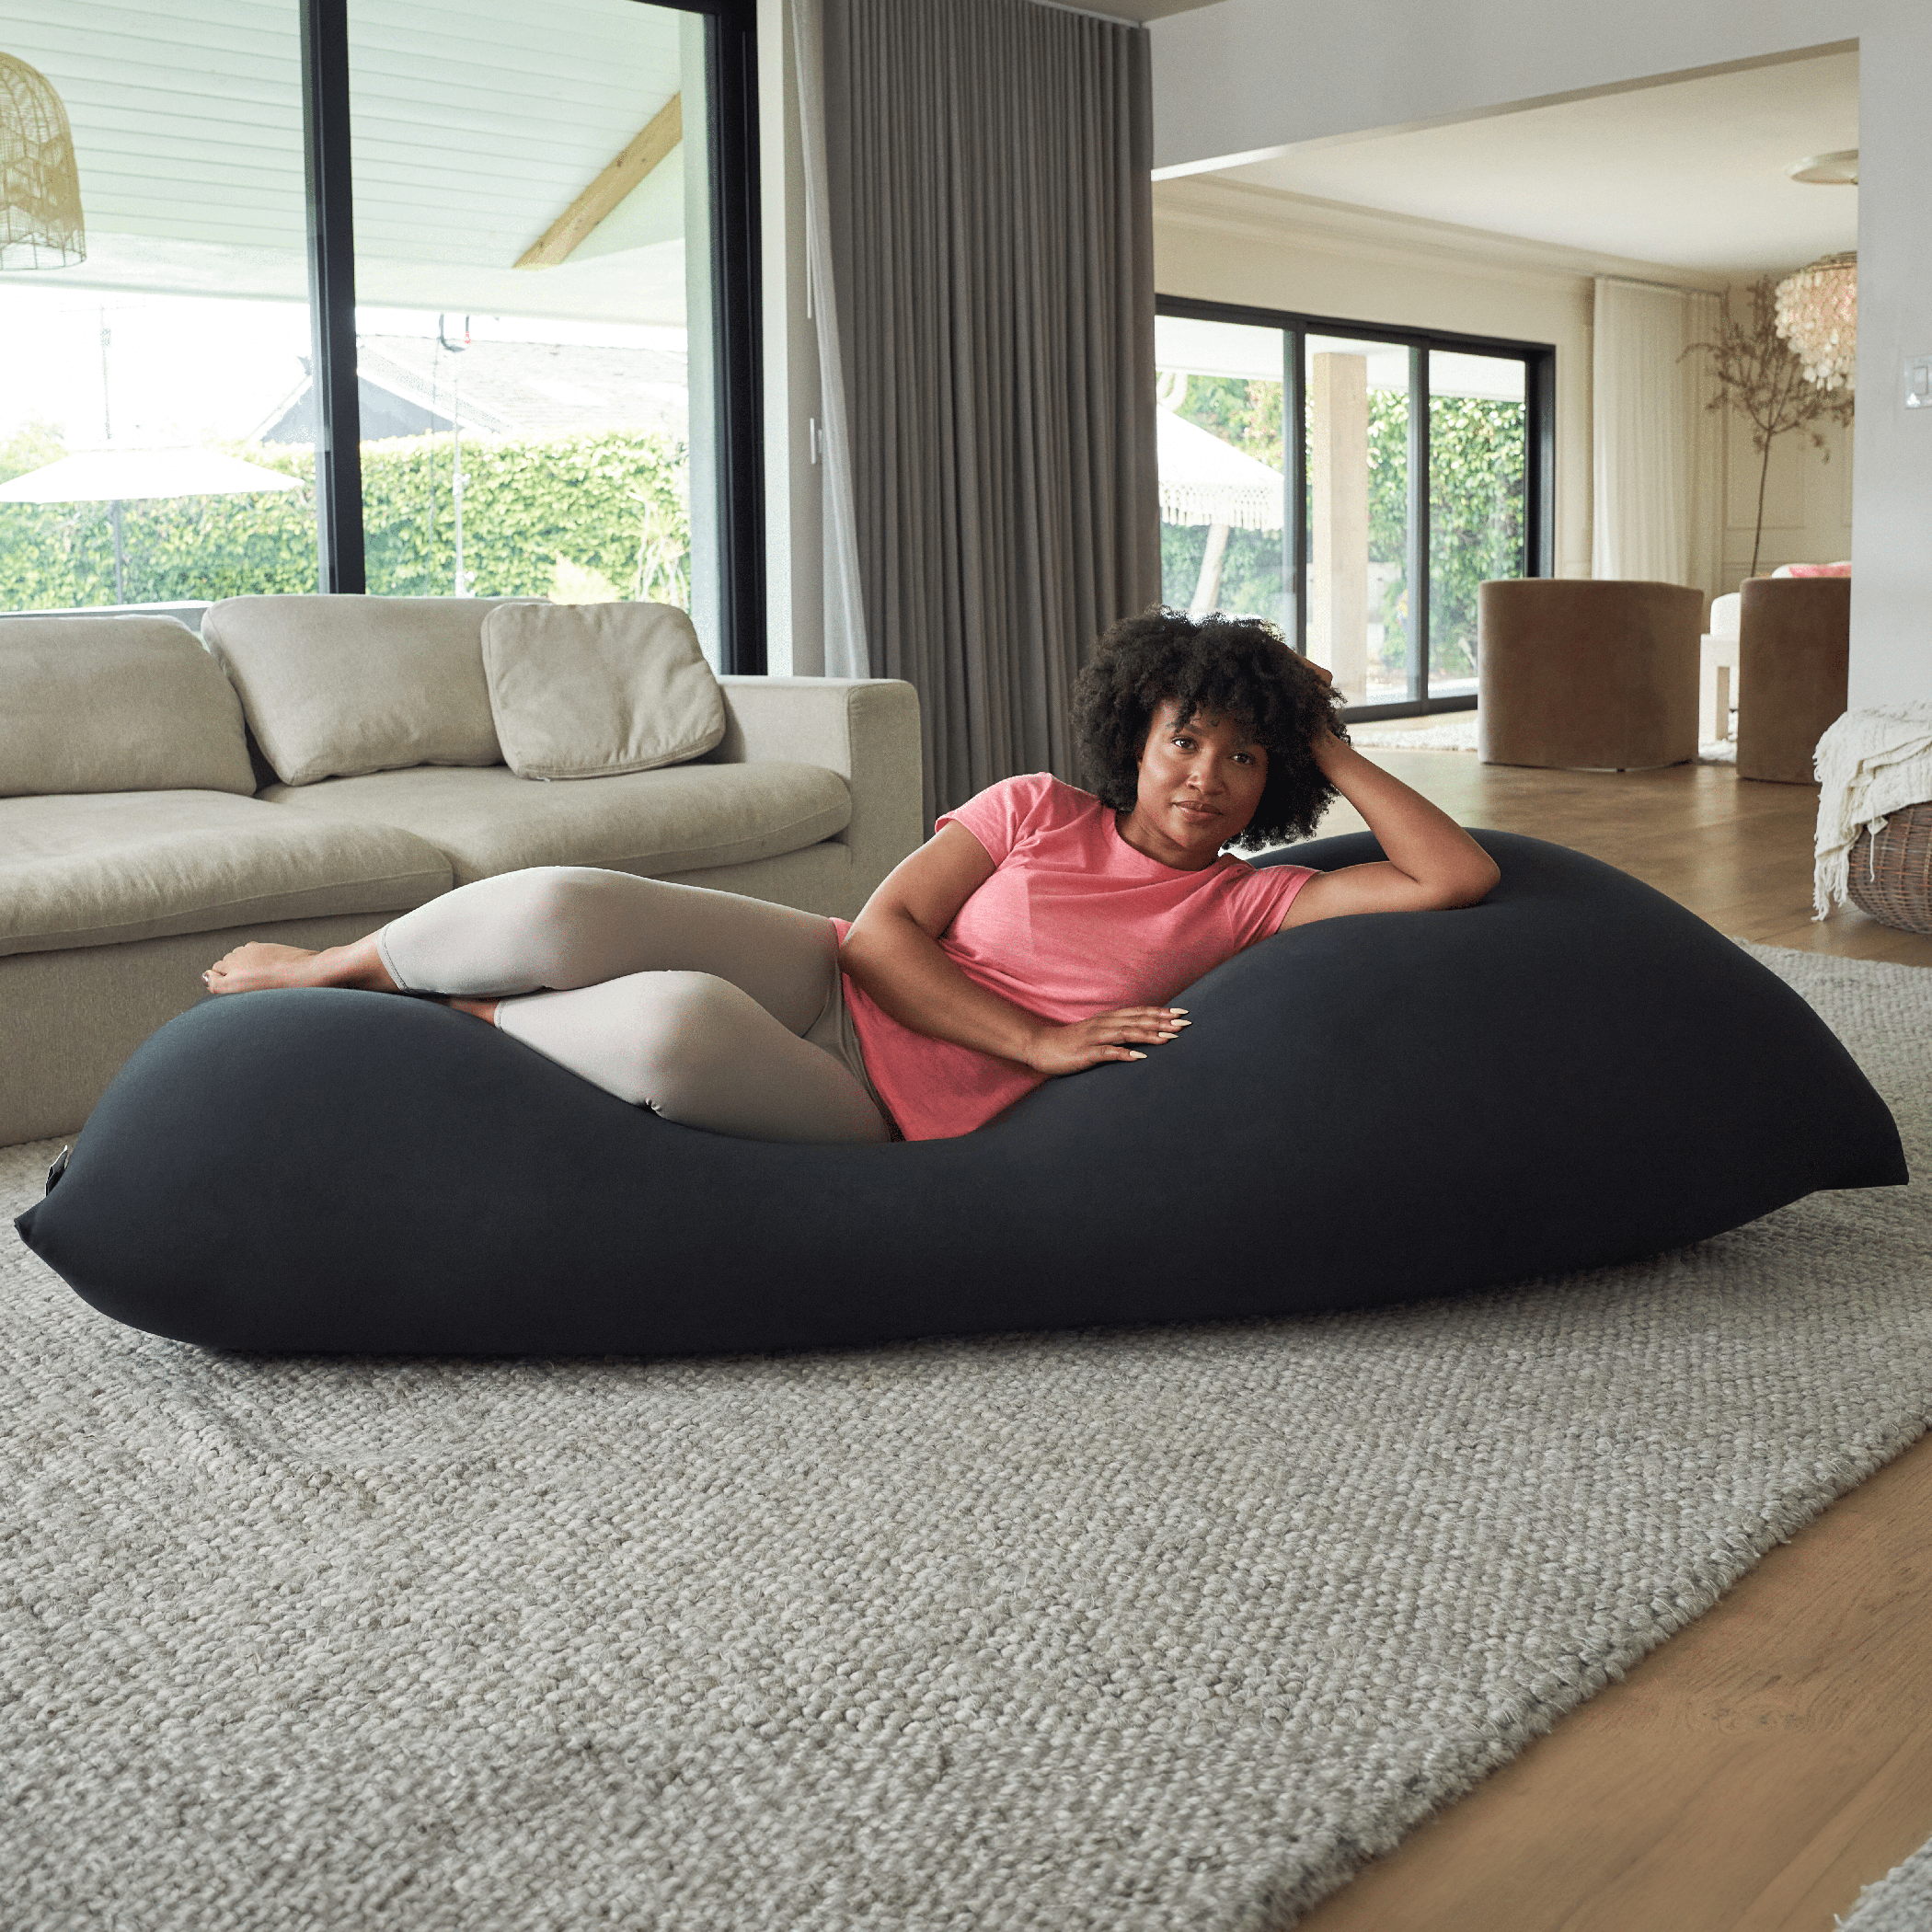  Yogibo Max 6 Foot Giant Bean Bag Chair Bed Lounger for Adults,  Kids and Teens with Filling, Extra Large, Oversized, Big, Huge, Plush,  Sensory Beanbag Couch Sofa Sack, Washable Cover, Rainbow